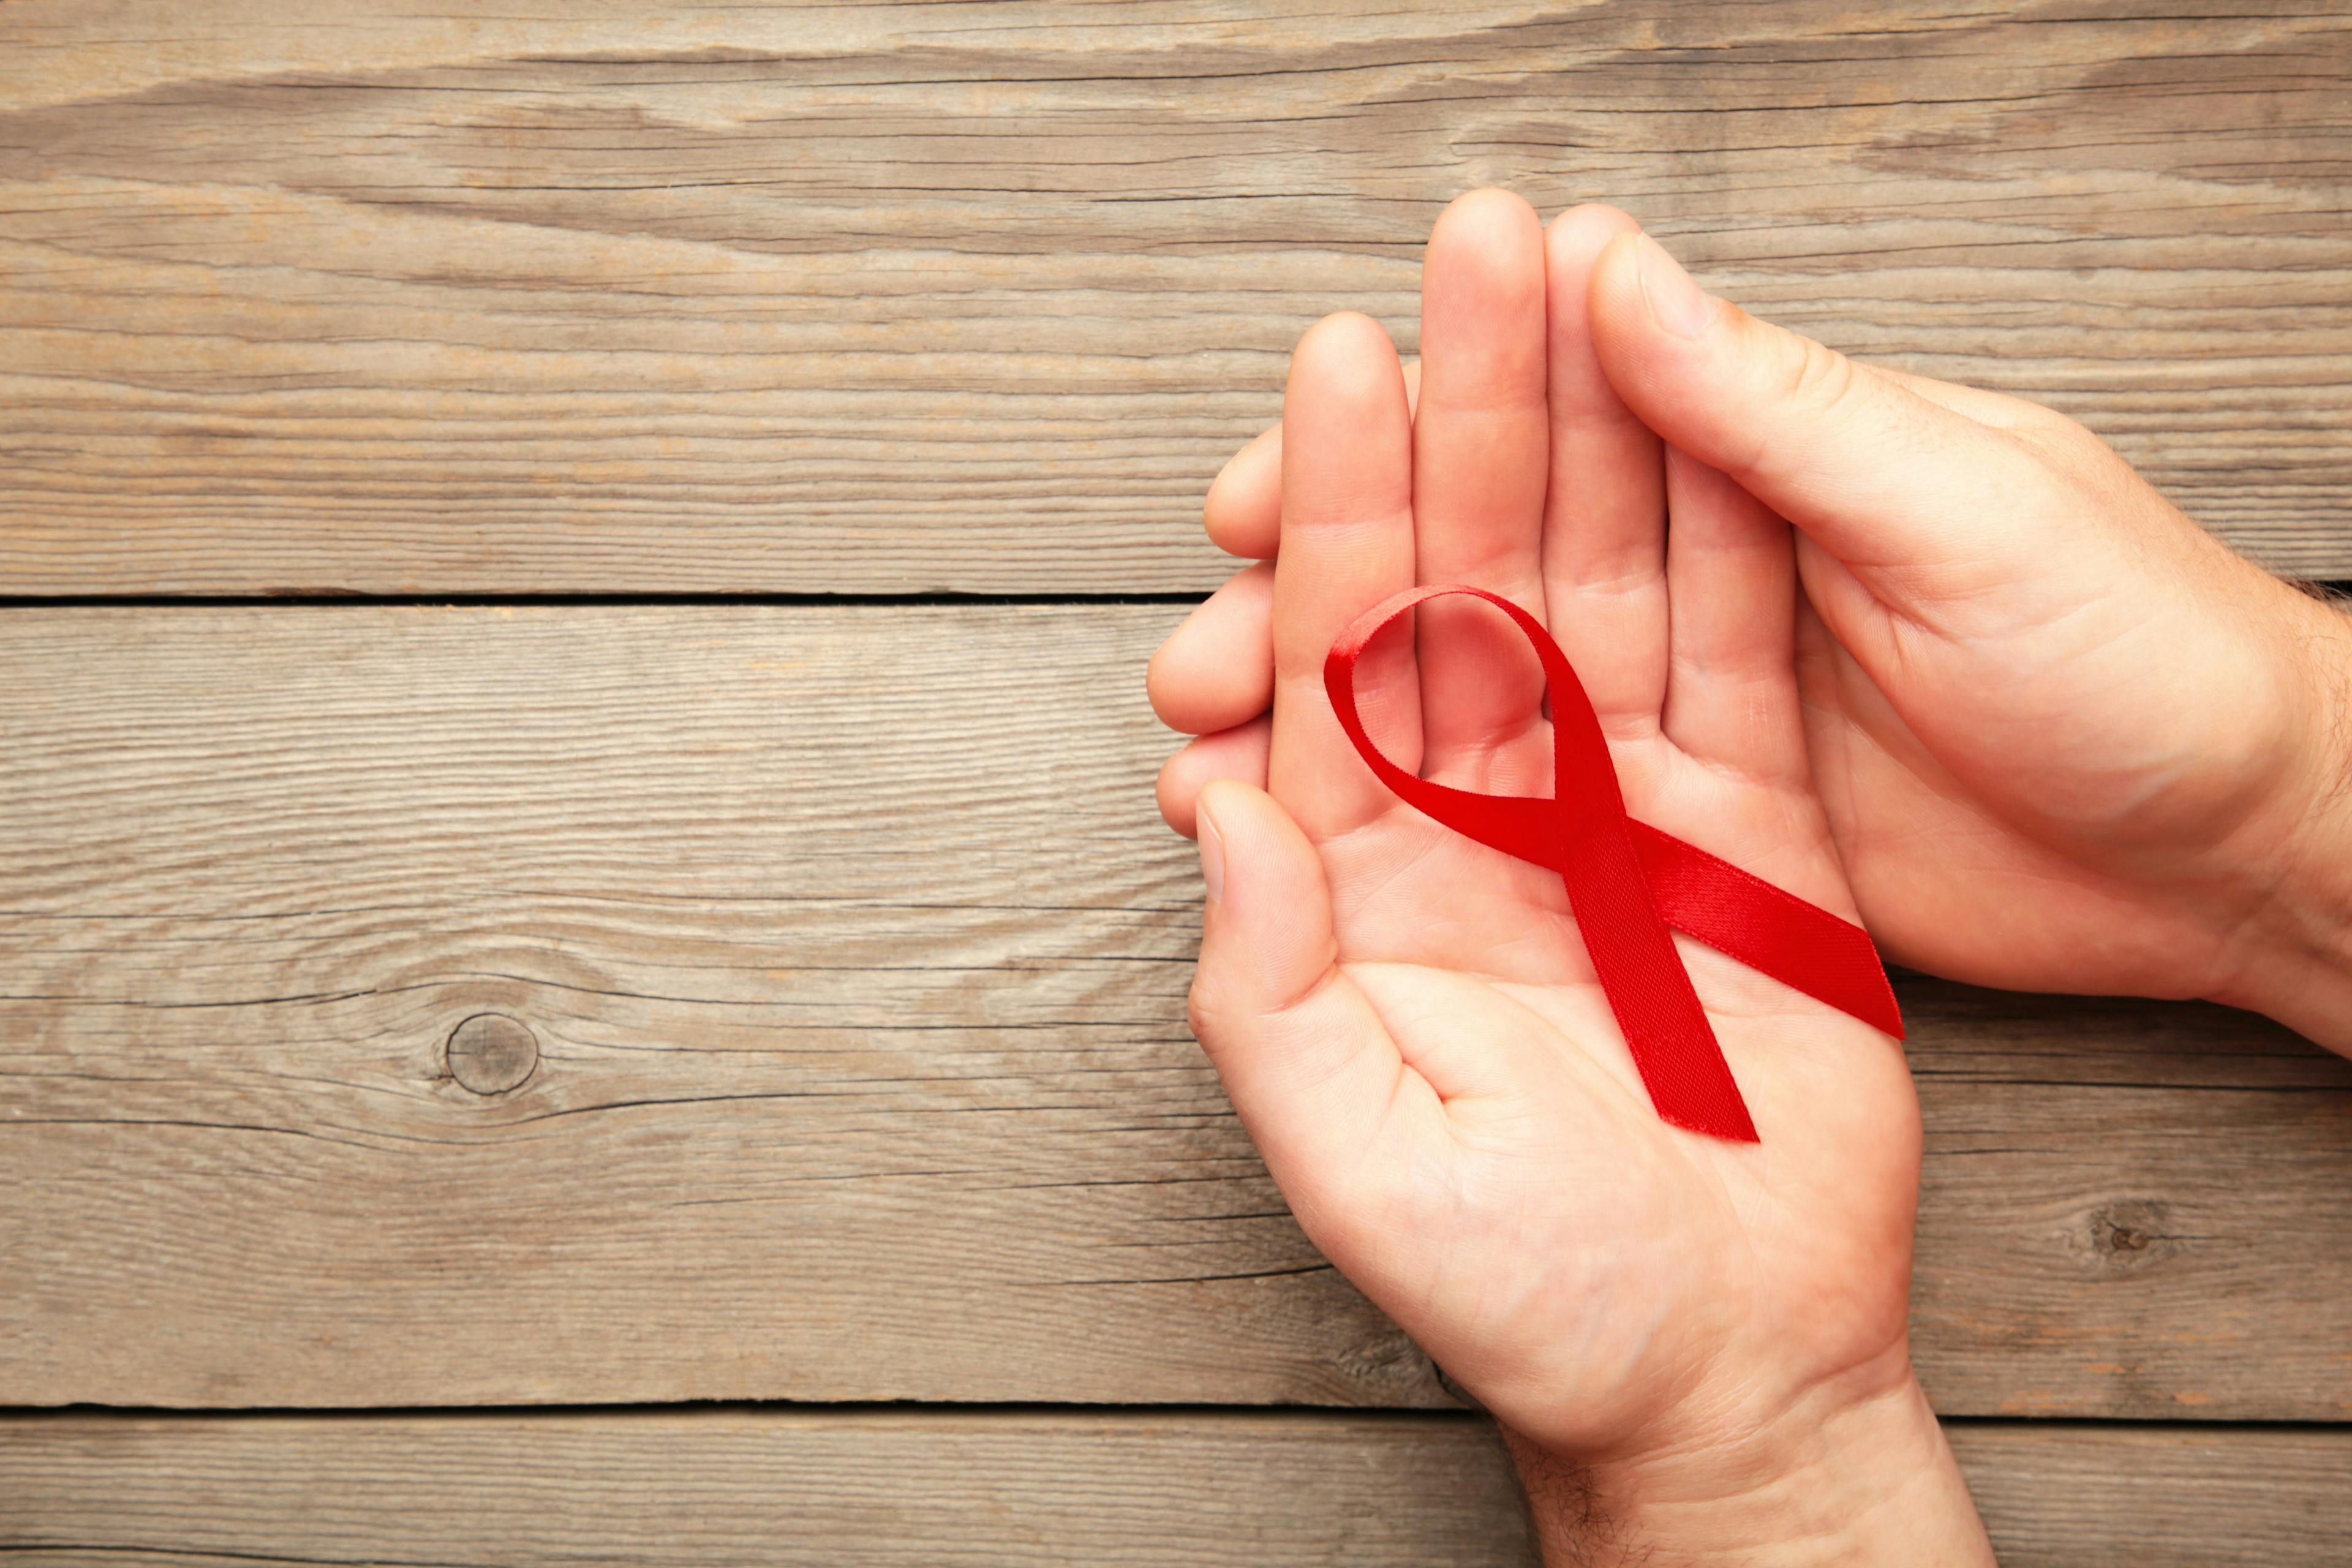 A female hands holding an aids red ribbon on grey | Image credit: Mouse family - stock.adobe.com